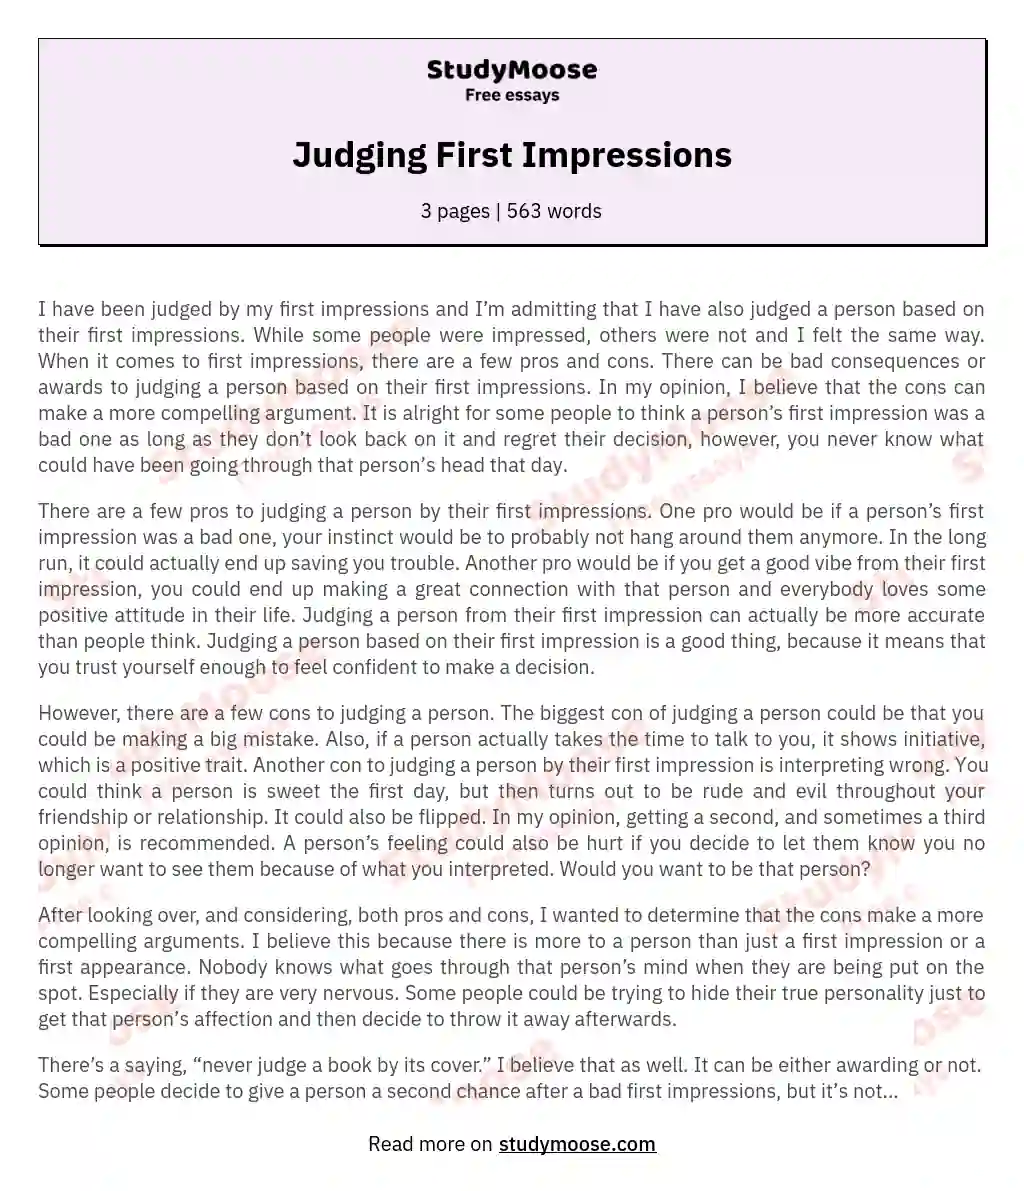 judging people by their appearance essay